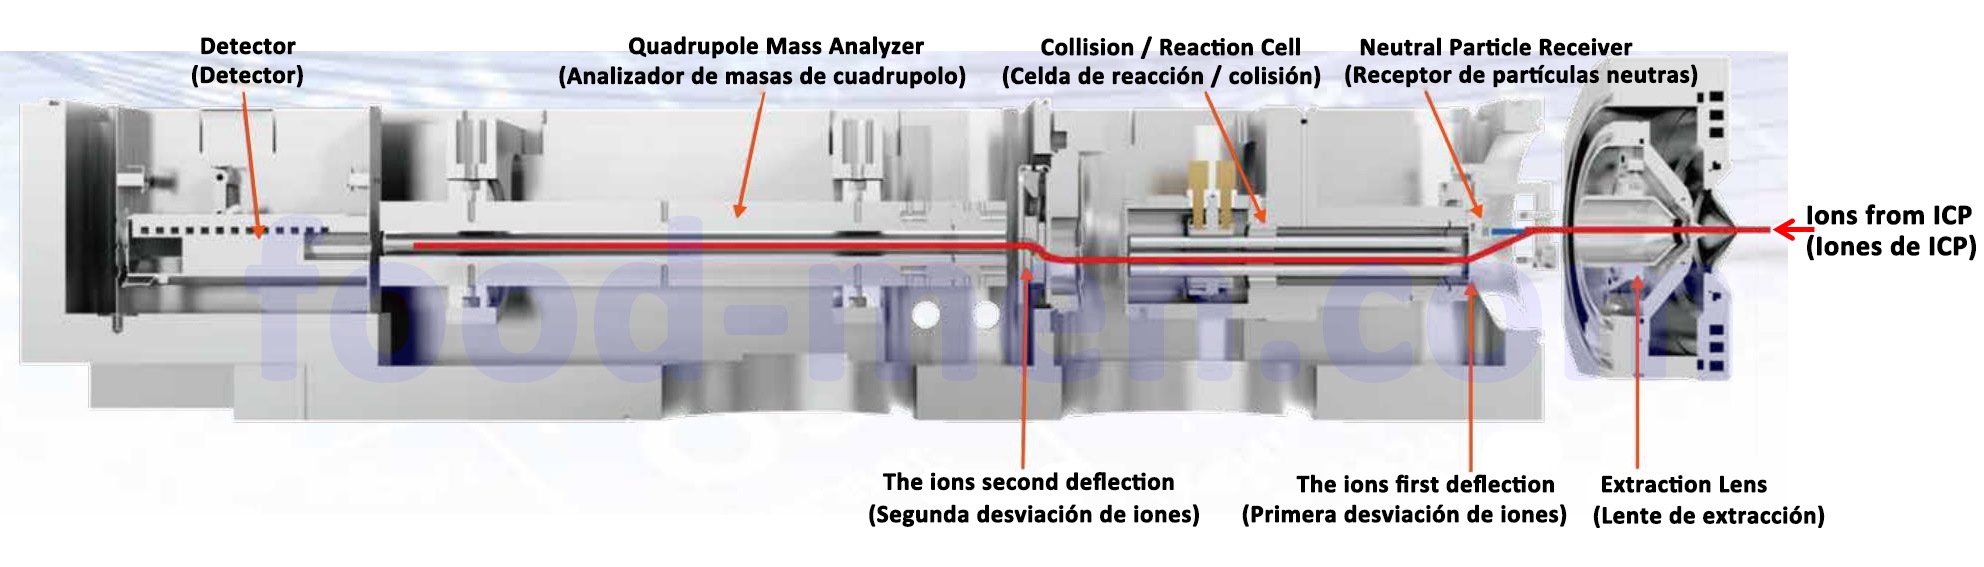 SUP-72 Inductively Coupled Plasma-Mass Spectrometer (ICP-MS)11-Schematic diagram of ion deflection transmission (schematic diagram of eliminating detection interference)